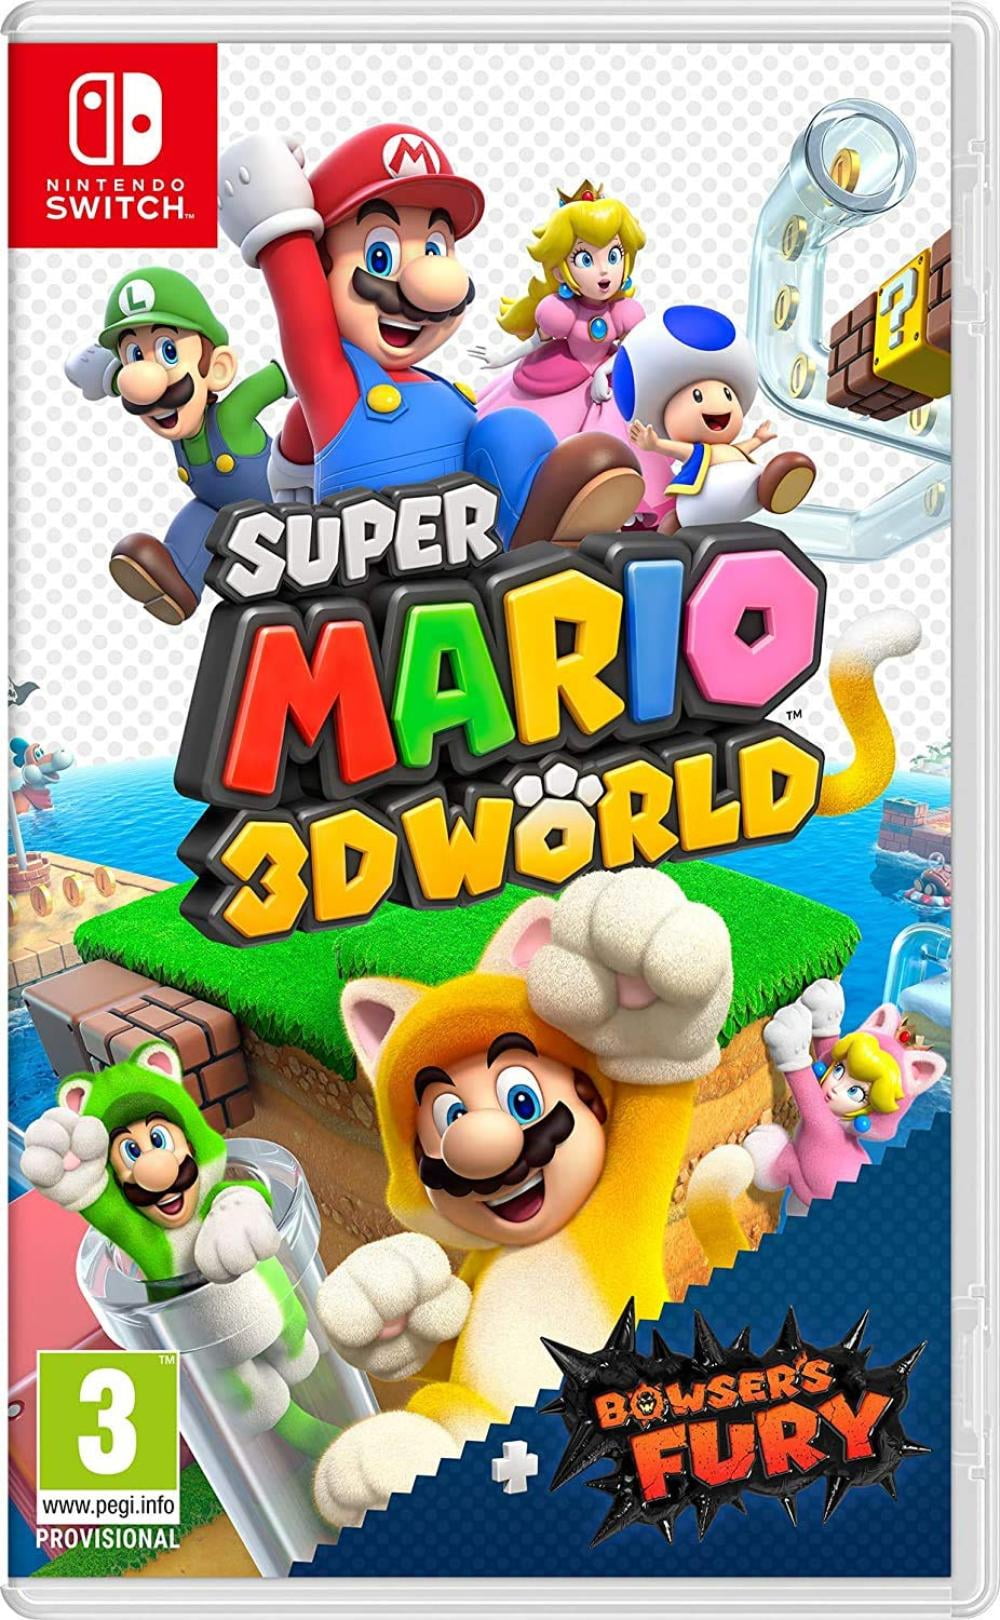 SUPER MARIO 3D WORLD PLUS BOWSERS FURY Nintendo Switch for sale online